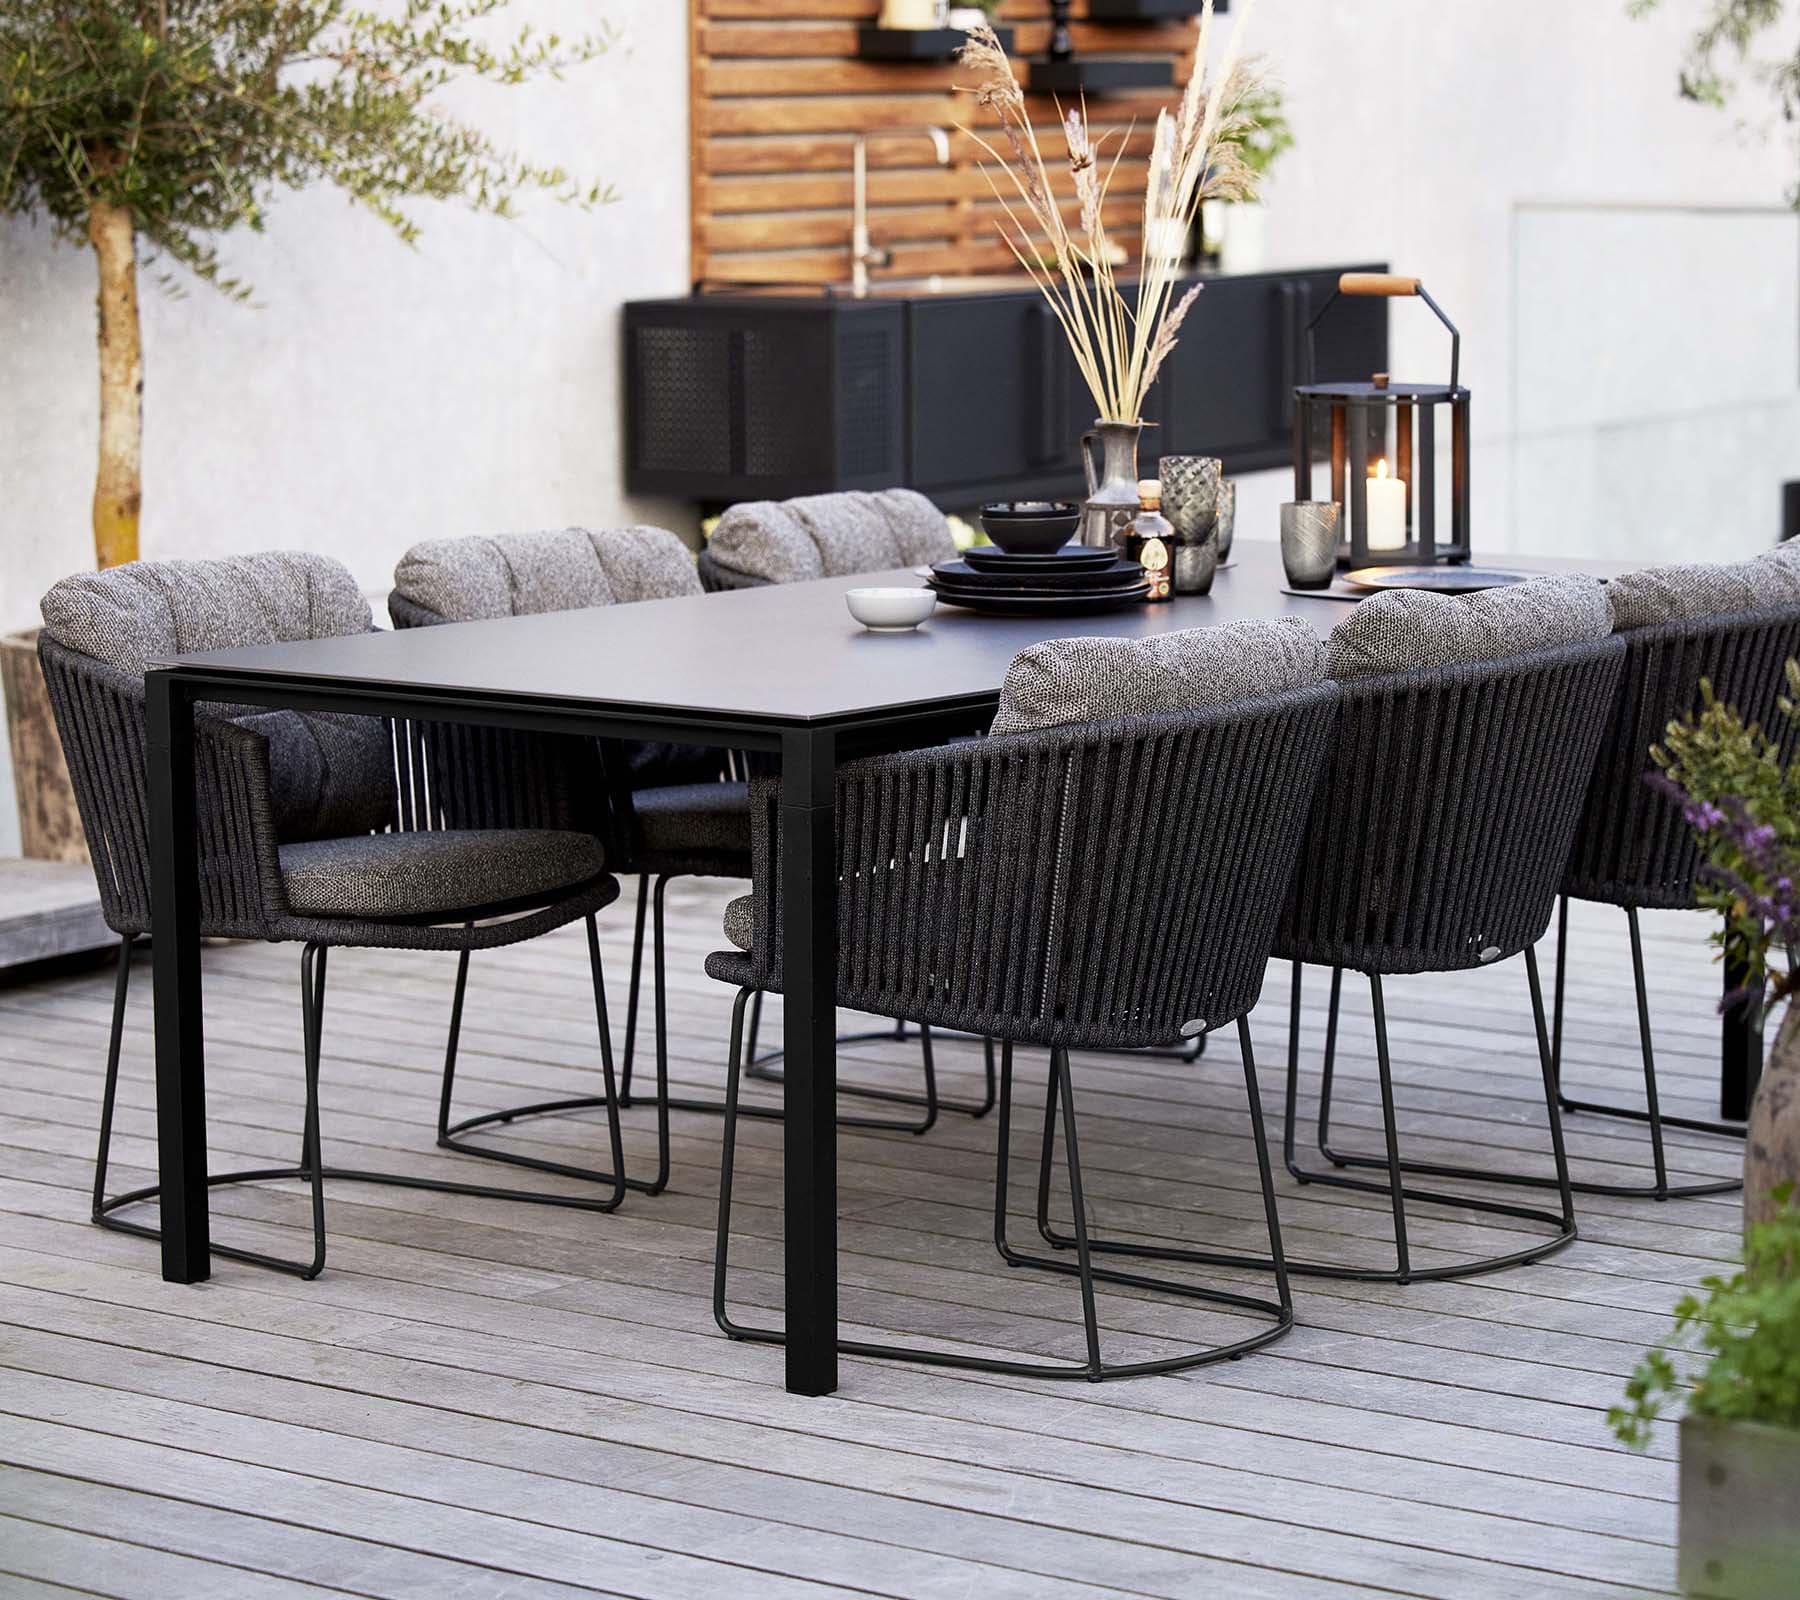 Boxhill's Moments Outdoor Dining Armchair lifestyle image with dining table at patio